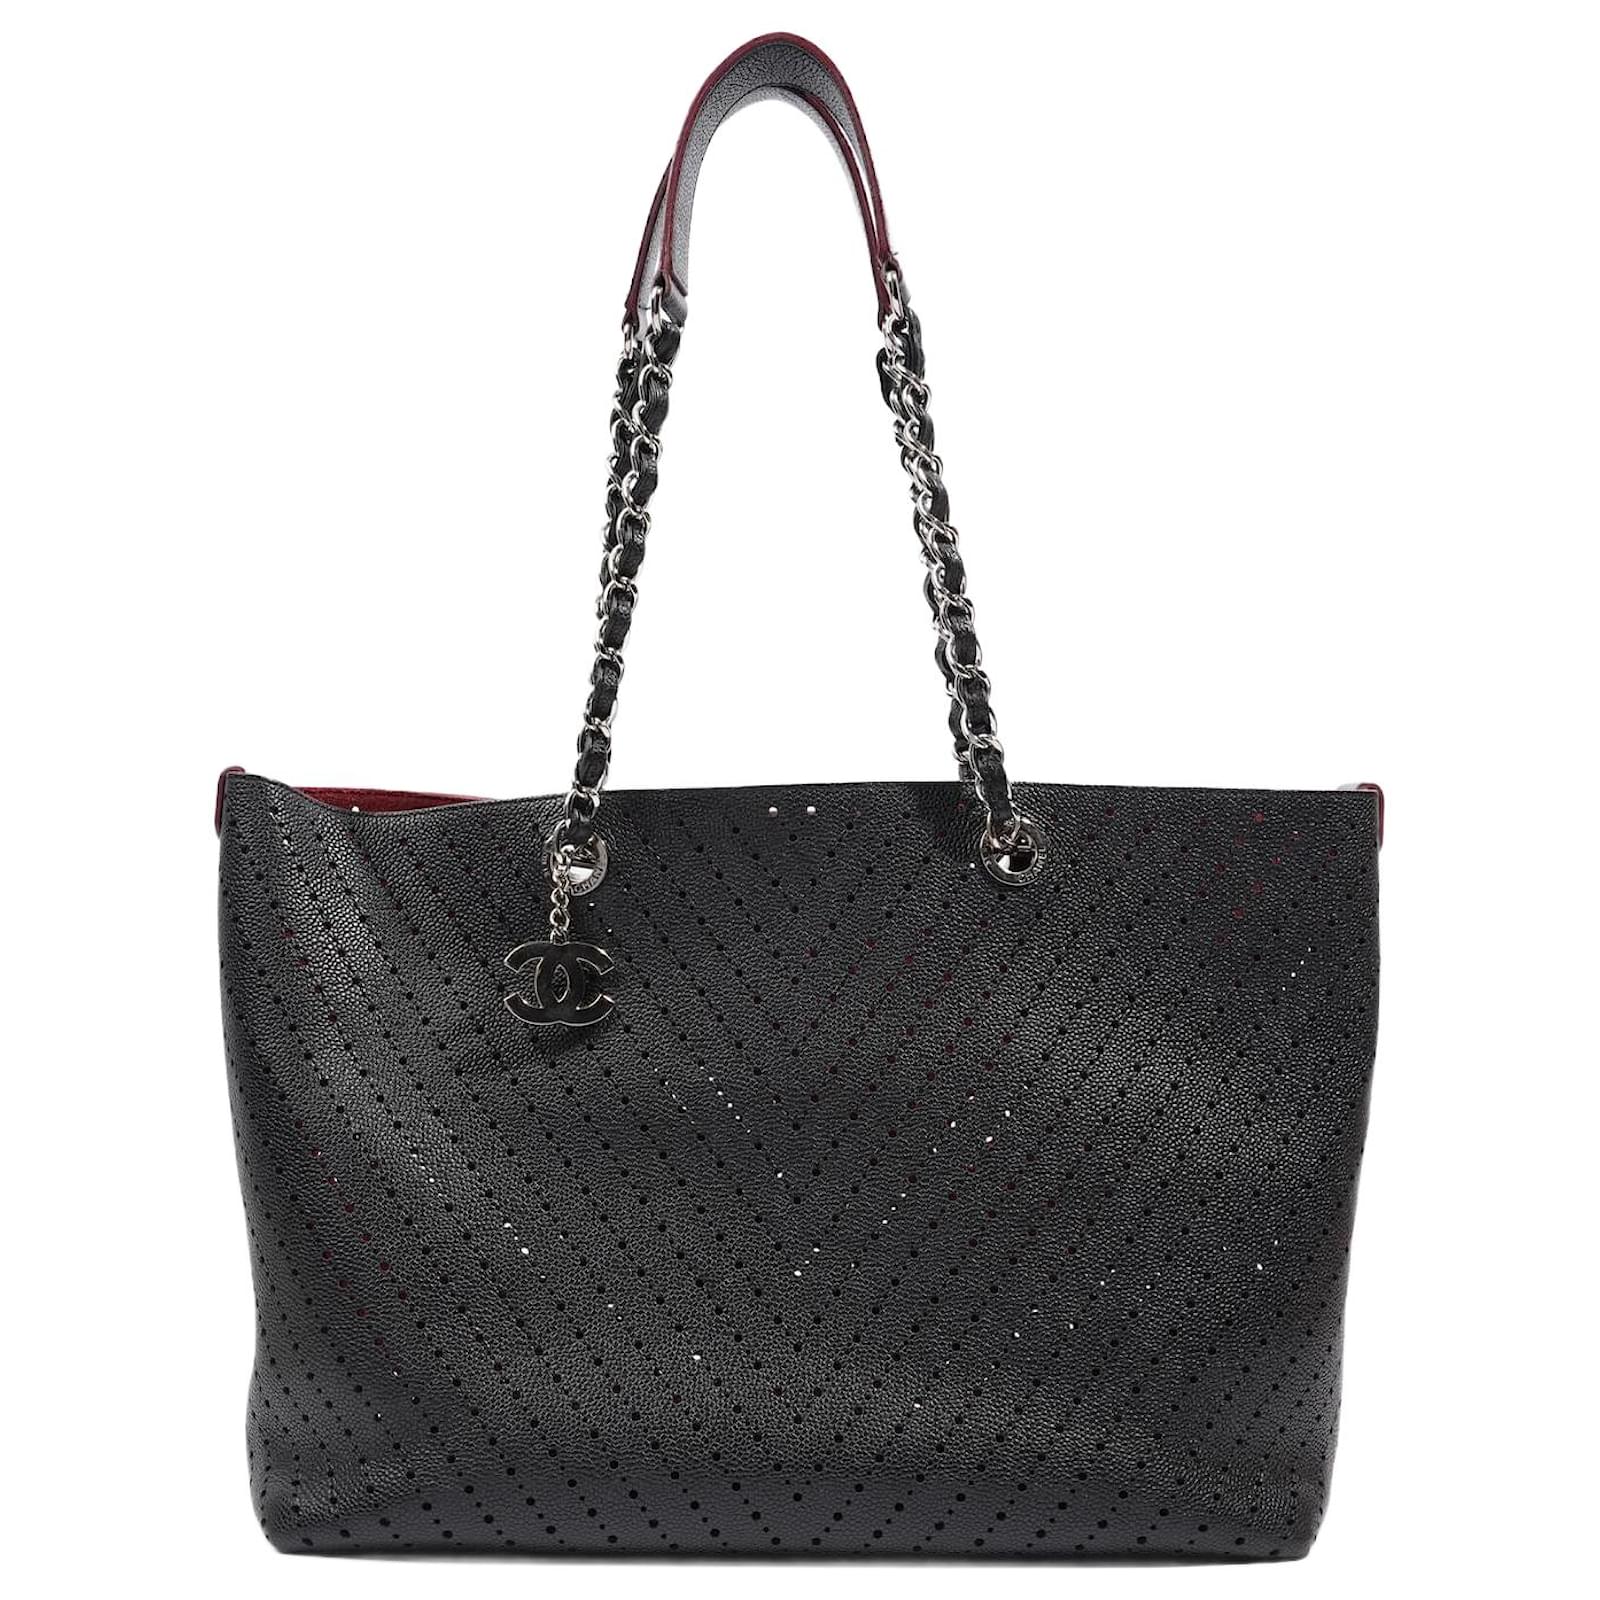 Chanel Shopping Tote Perforated Black Caviar Leather